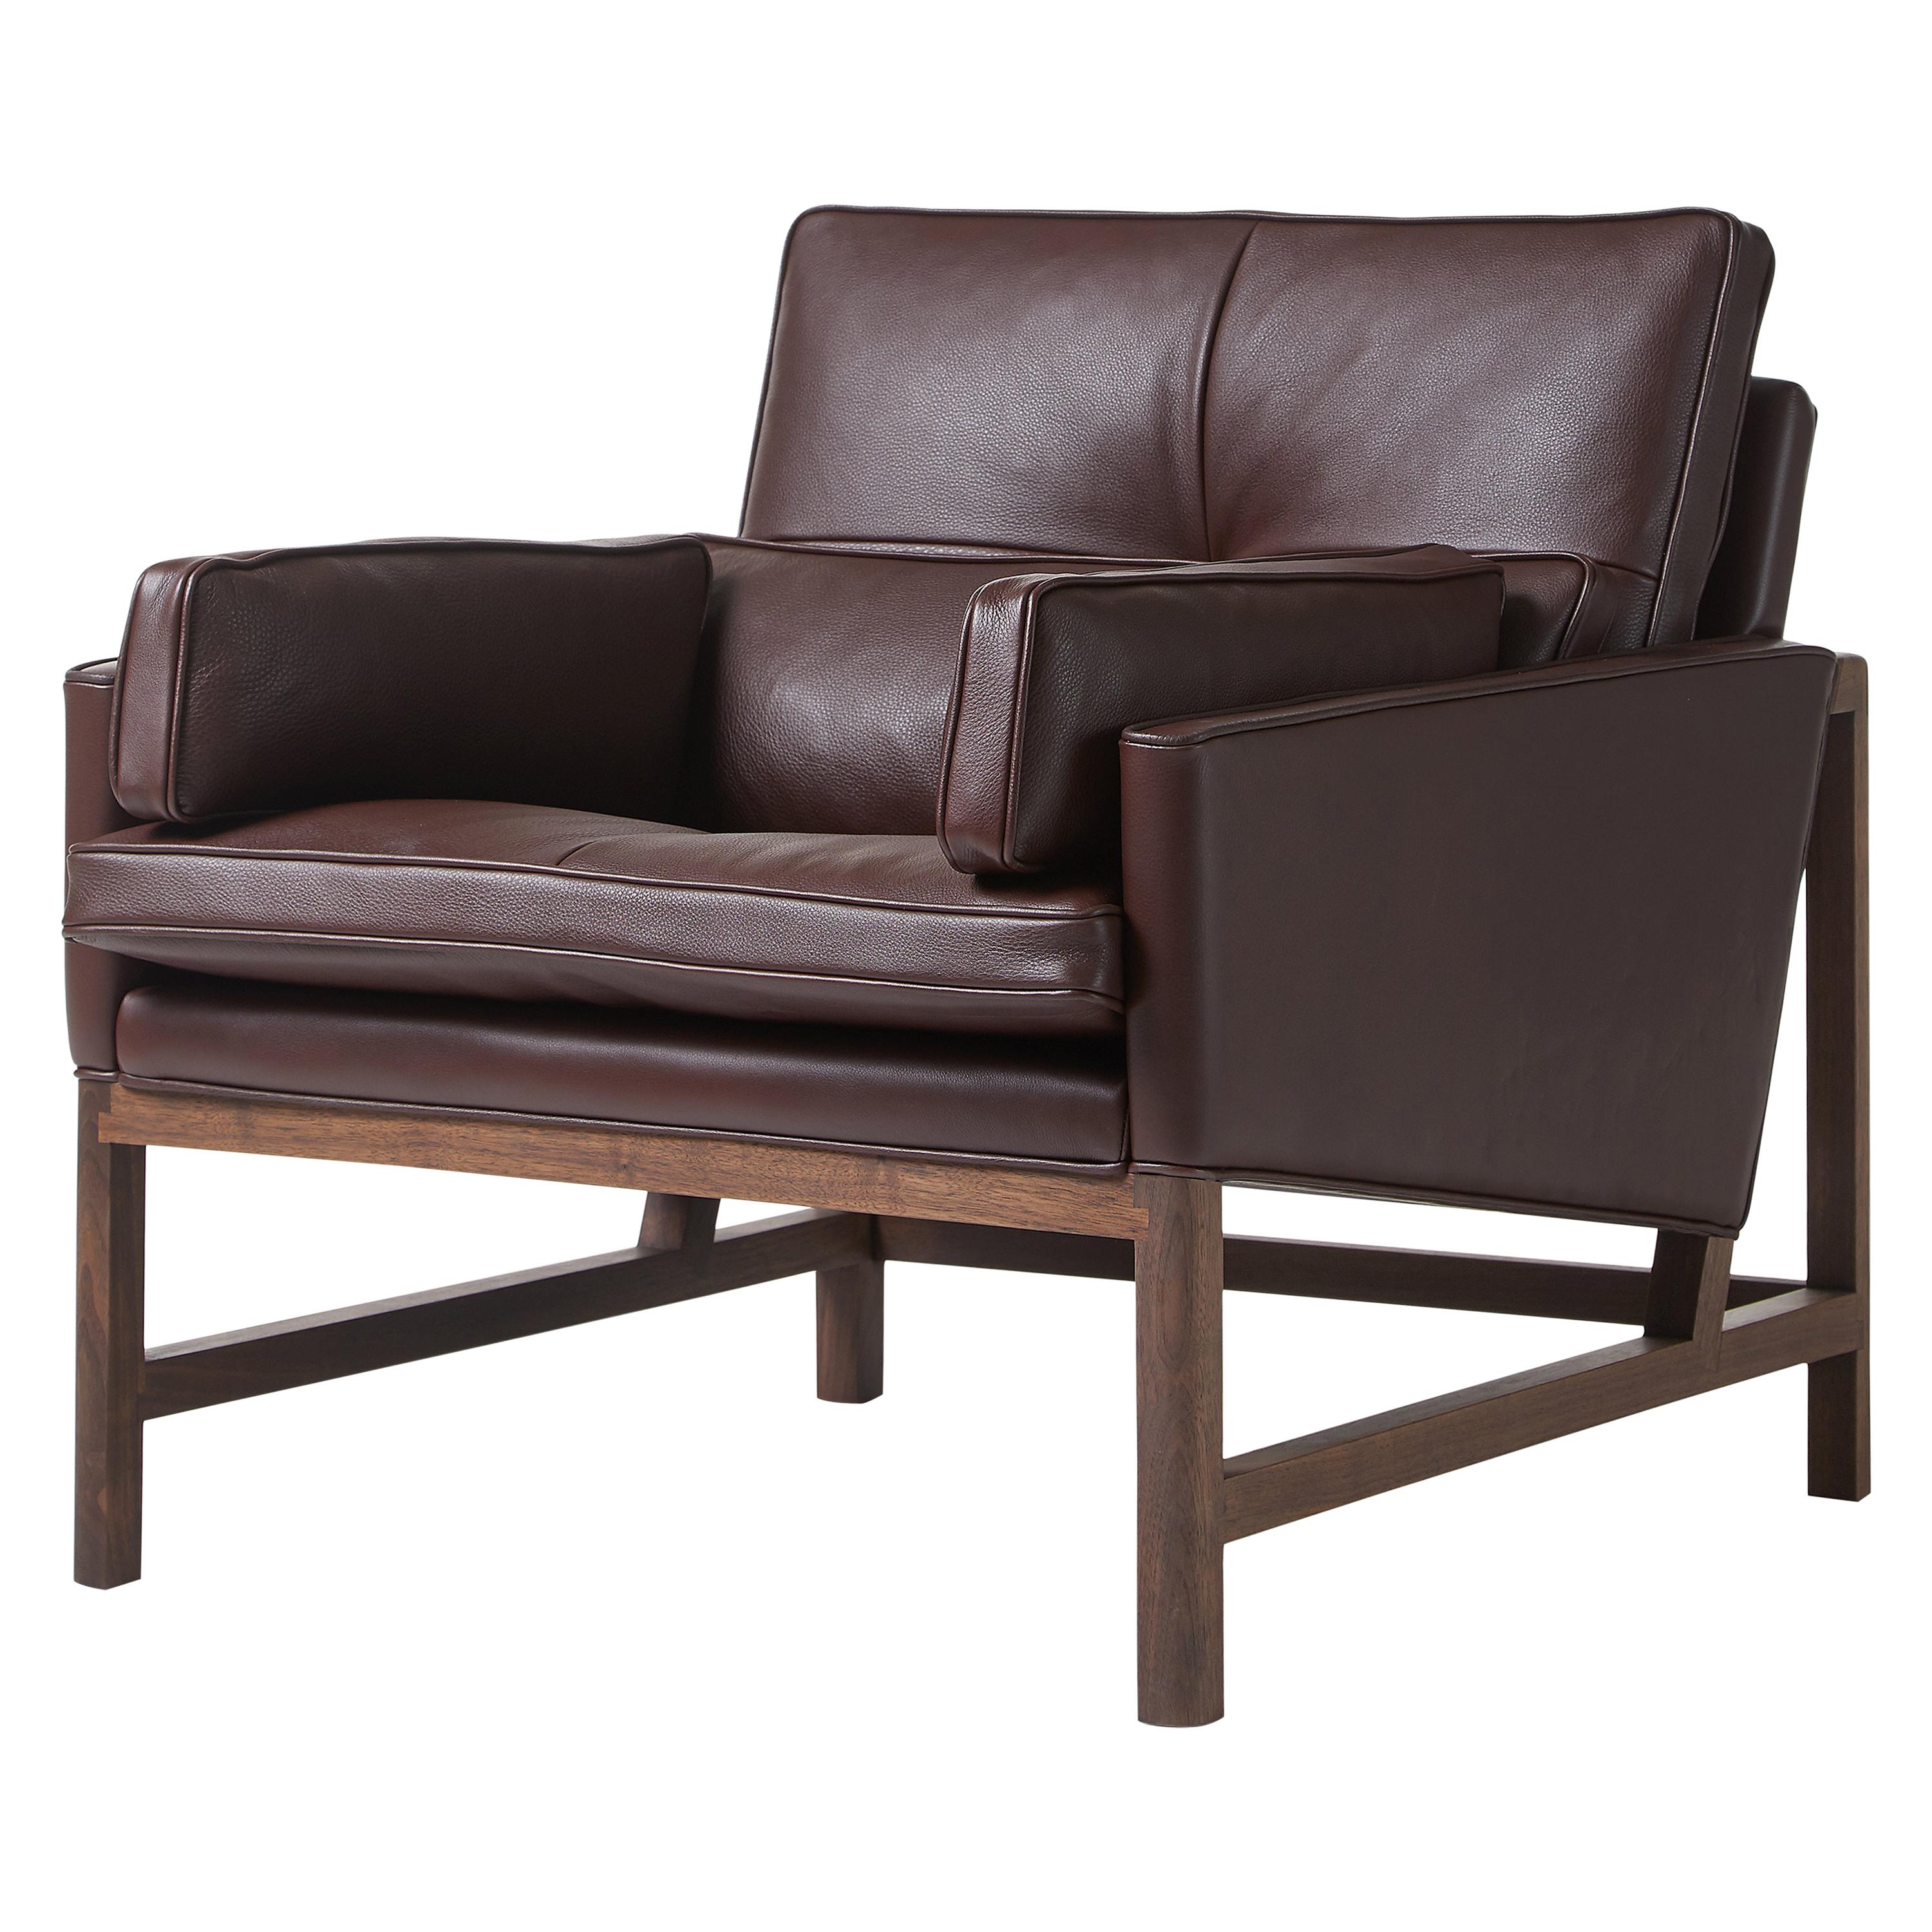 For Sale: Brown (Comfort 93287 Chocolate) Wood Frame Low Back Lounge Chair in Walnut Black Oil Designed by Craig Bassam